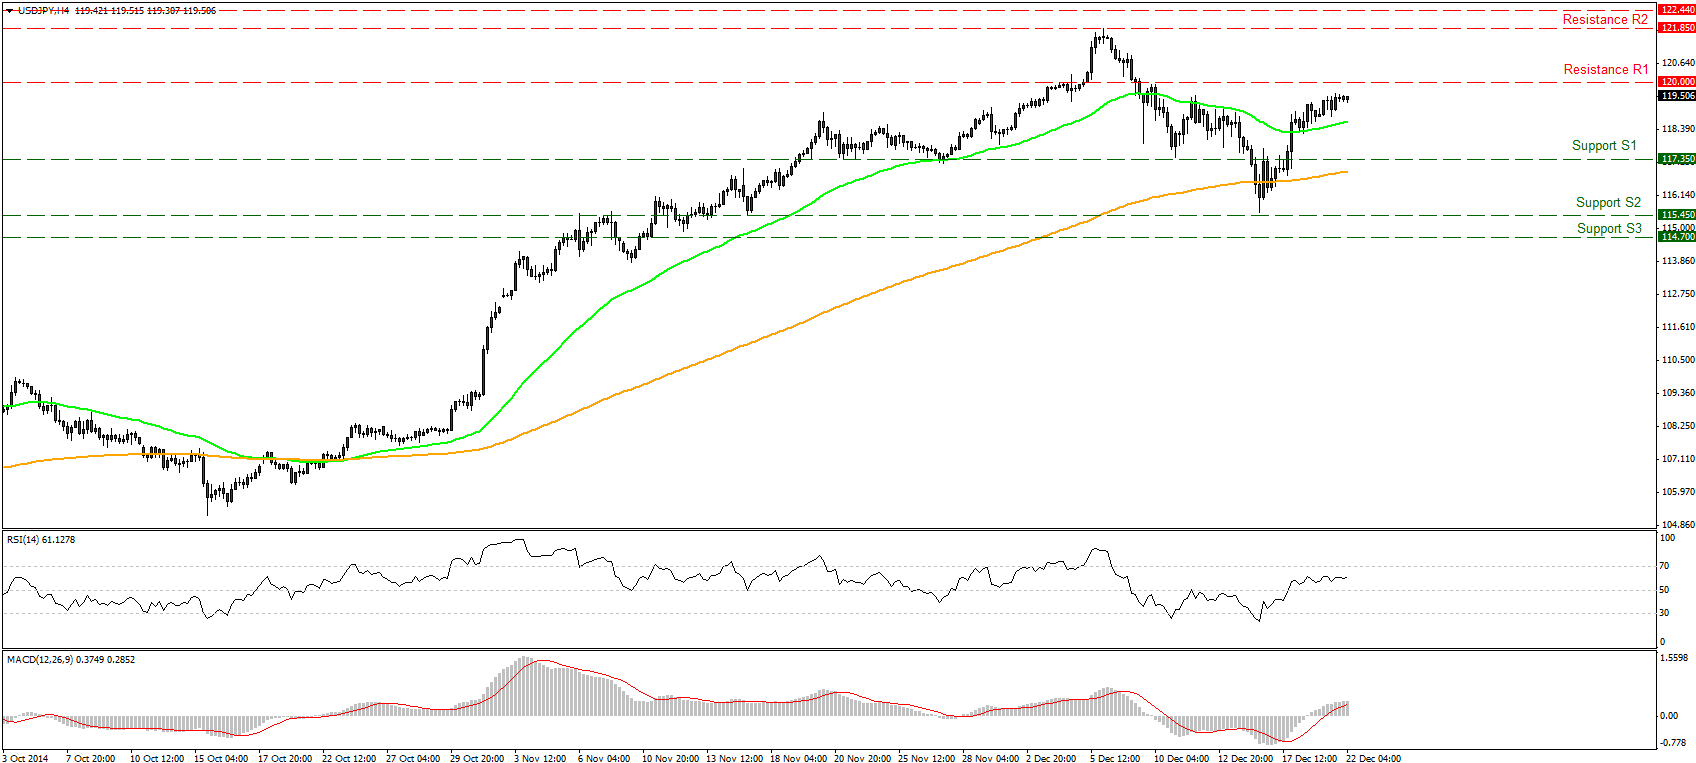 USD/JPY 3 Month Chart with RSI and MACD